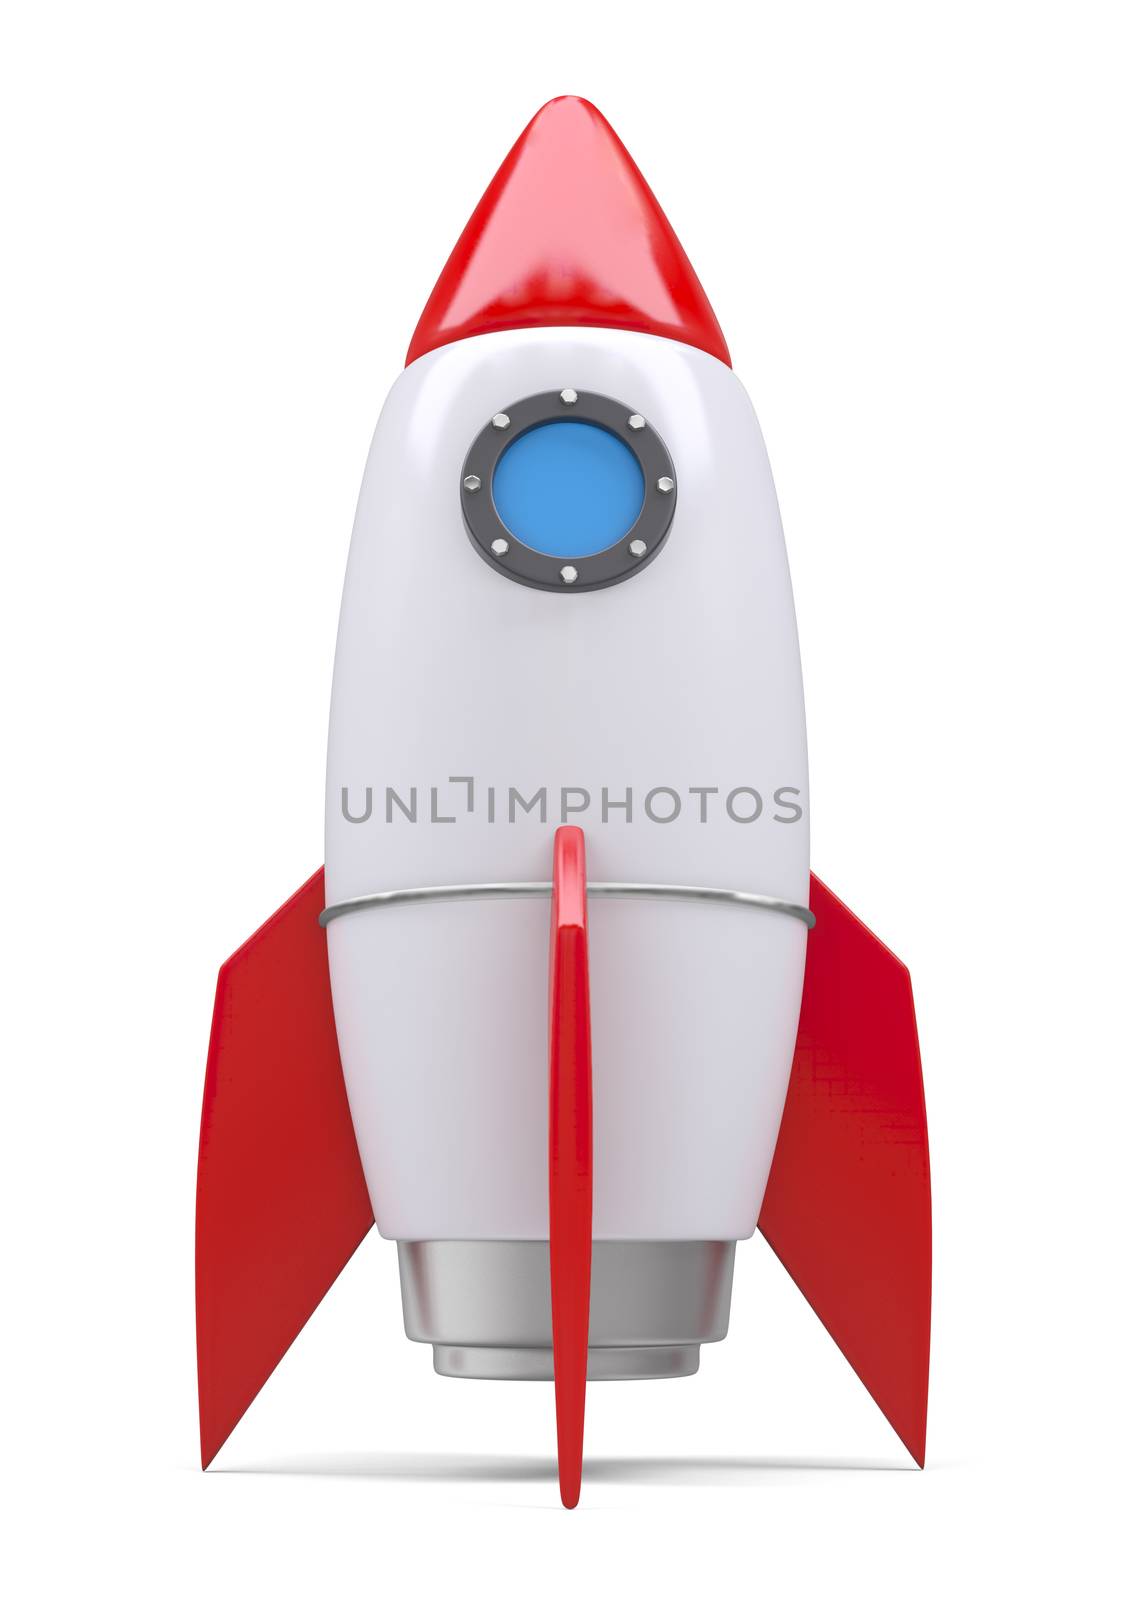 Rocket space ship, isolated on white. 3D rendering